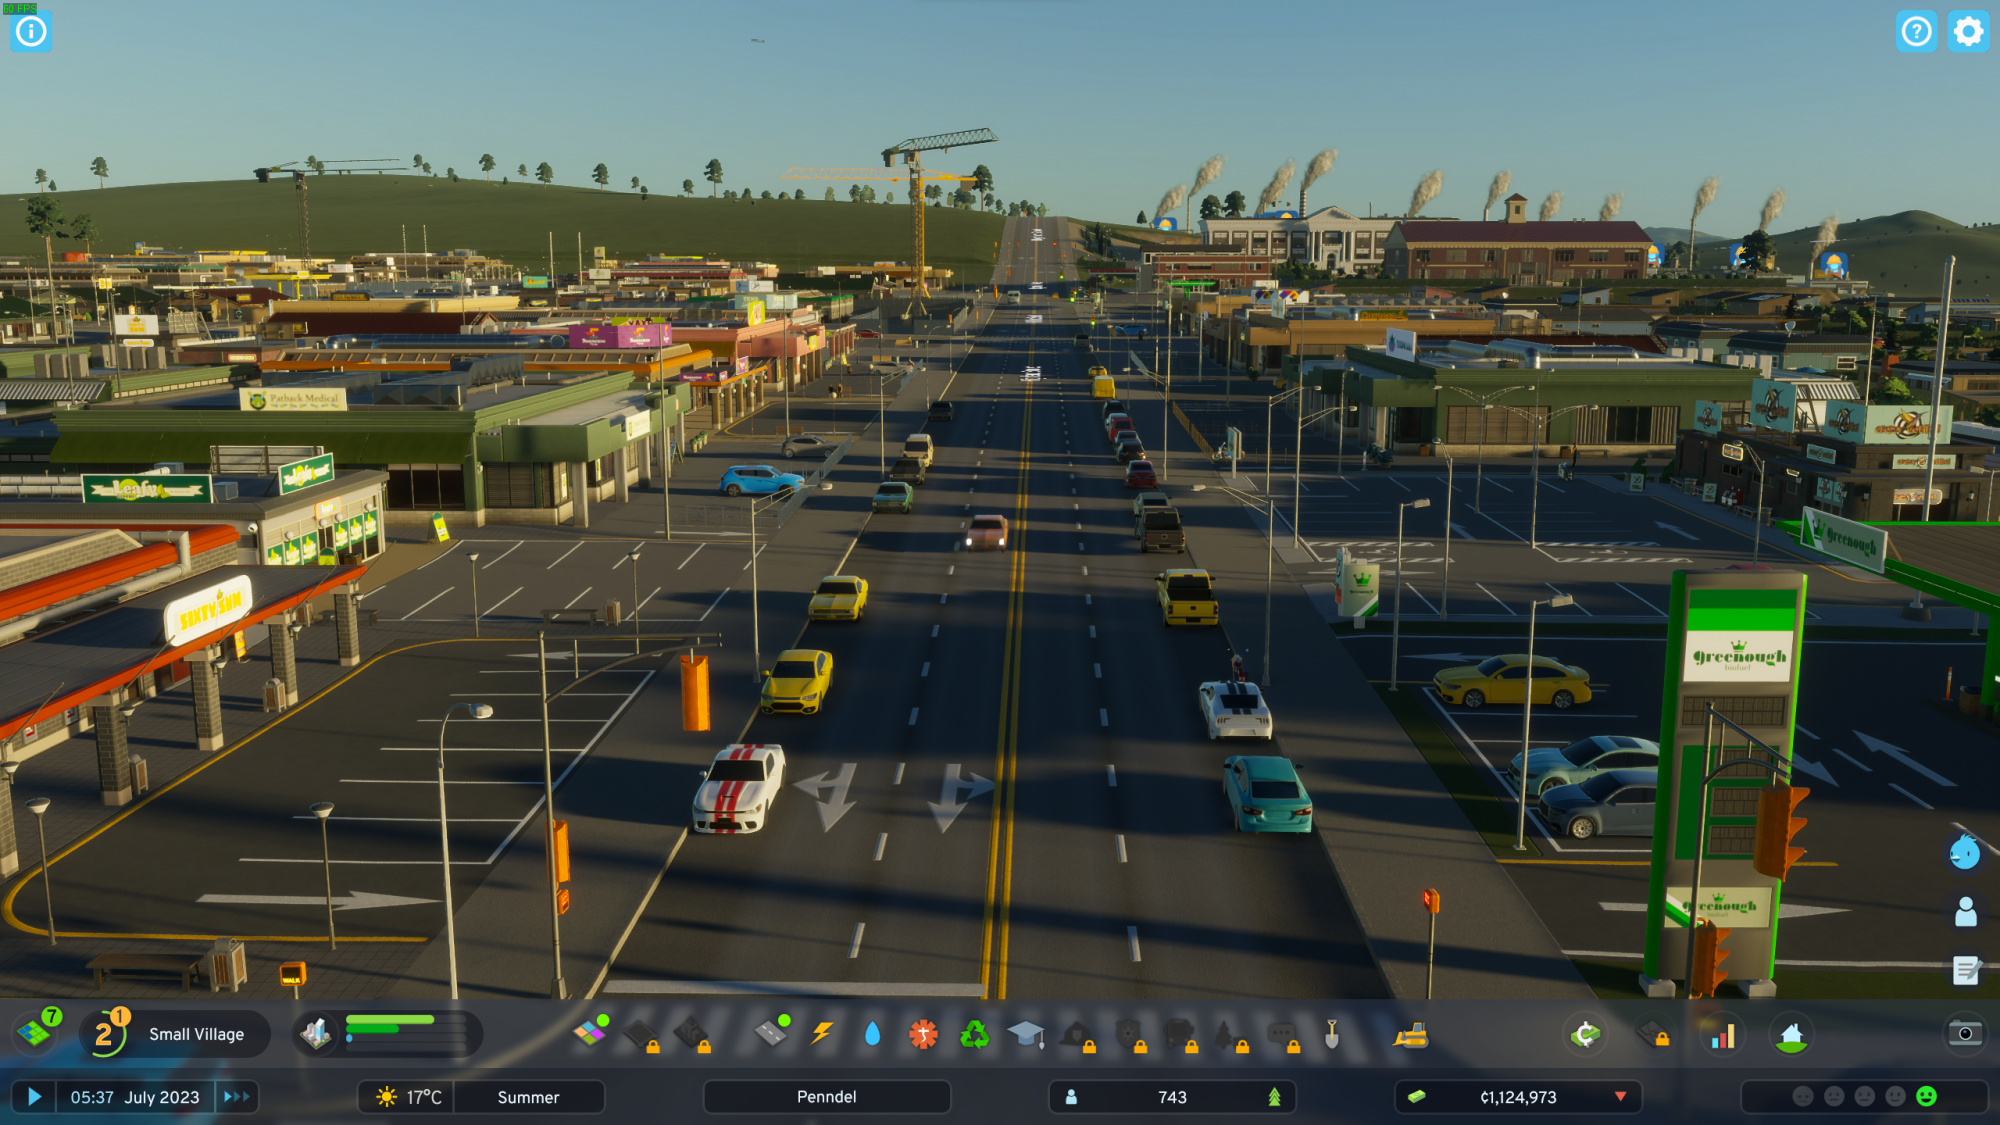 Cities Skylines 2 runs with 20fps on an NVIDIA RTX4090 at 4K/High